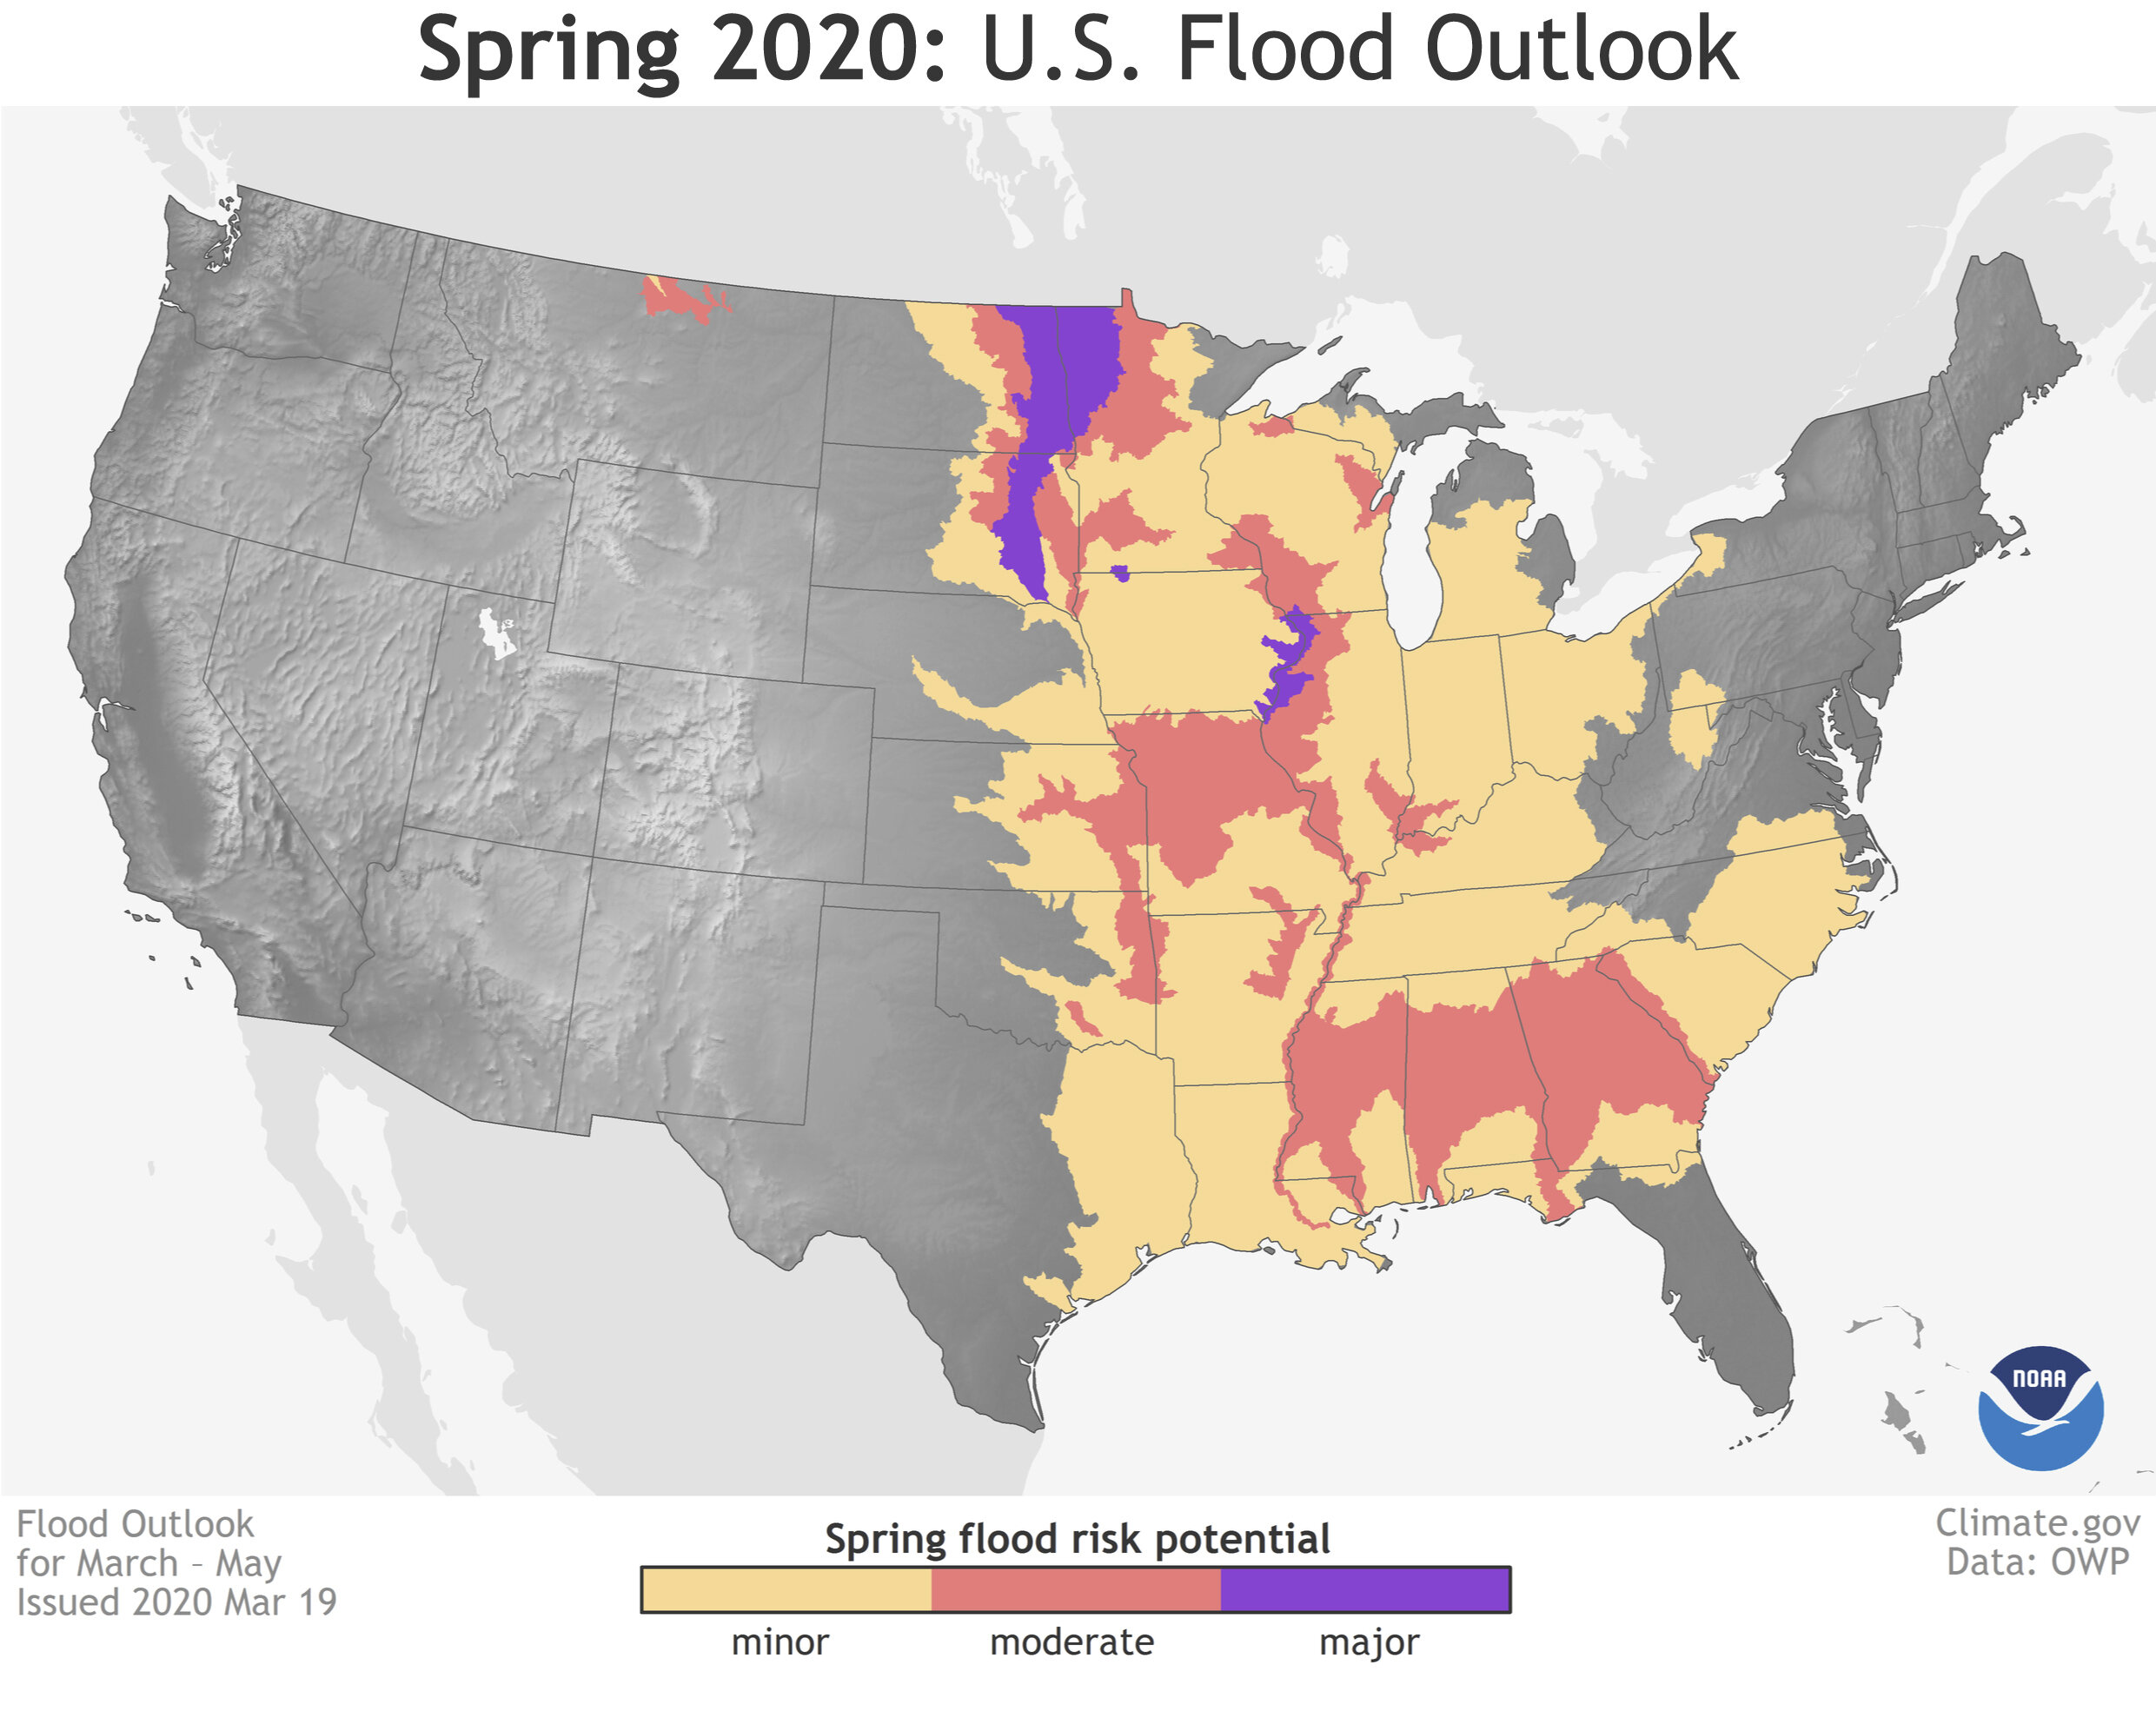 Scientists expect spring floods to be milder than last year